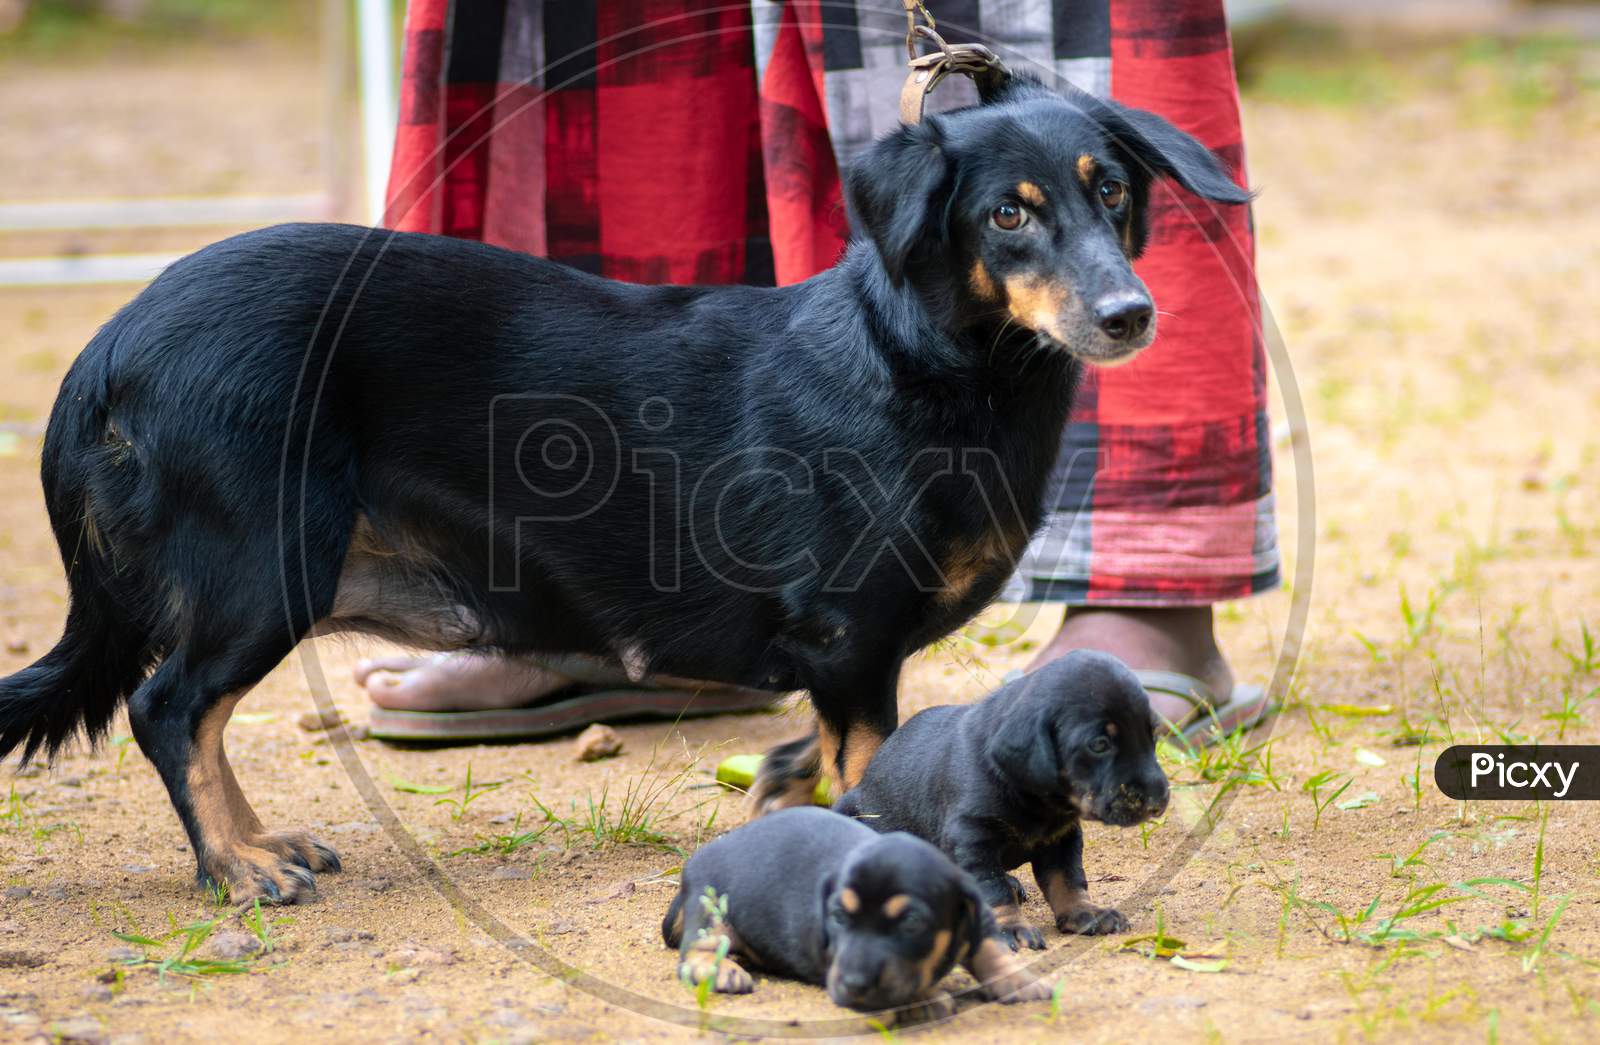 Dachshund Dog Family Photograph, Innocent Mother And Her Two Adorable Infant Baby Pups Looking At The Cameraman, Master Standing Close To Them Holding The Leash Just In Case.